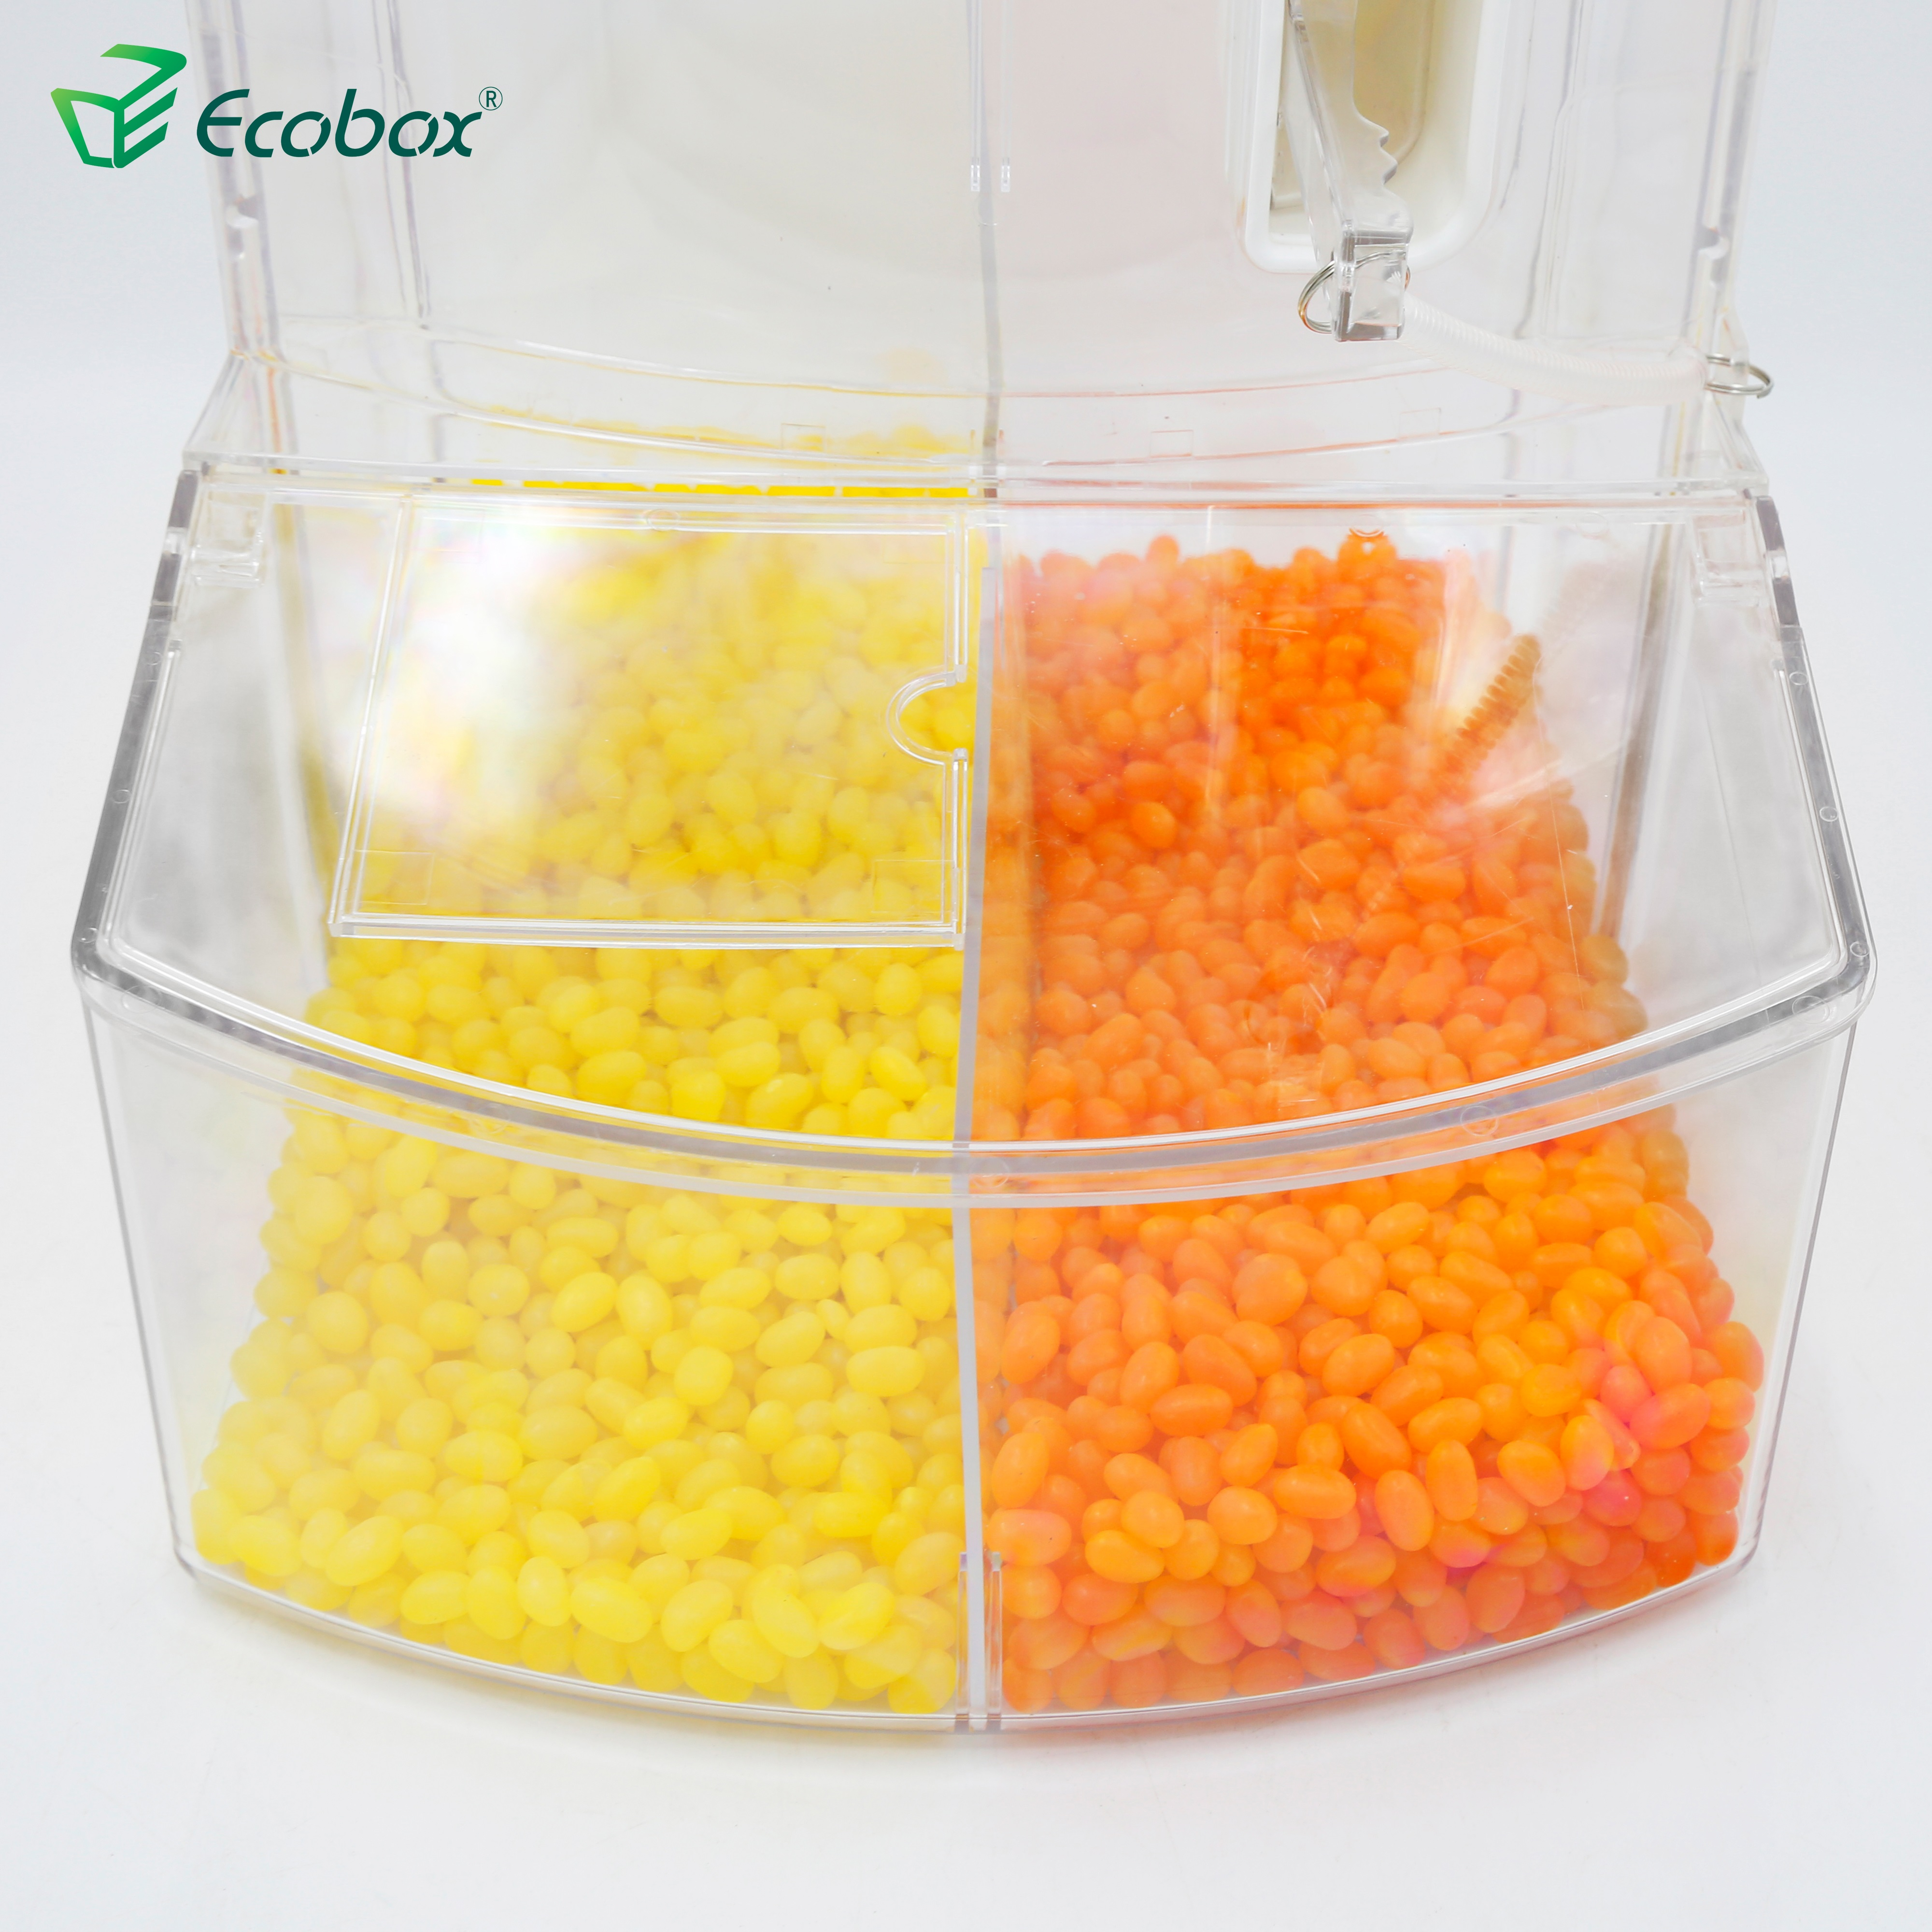 LD-01 Scoop bin Ecobox hot selling bulk candy nuts food bin container for supermarket or zero waste shop